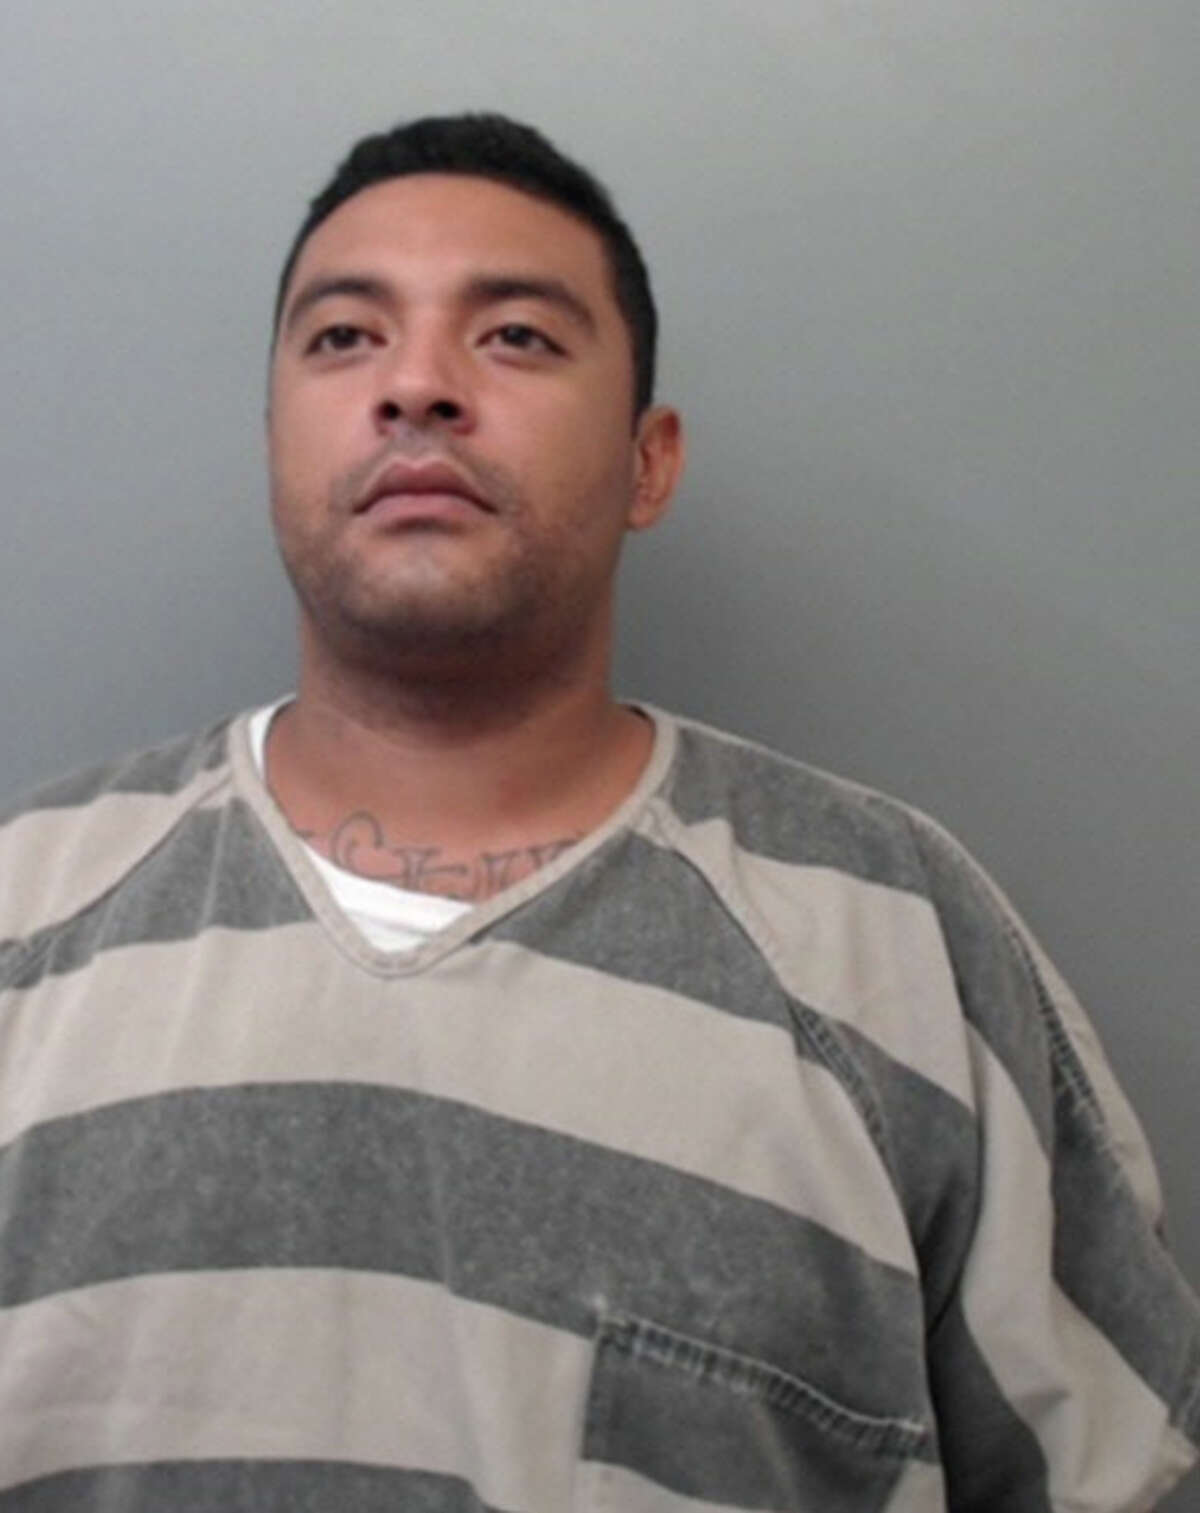 Jose Grant Alvarado, 30, was charged with aggravated assault of a date, family or household member with a weapon and obstruction, retaliation.